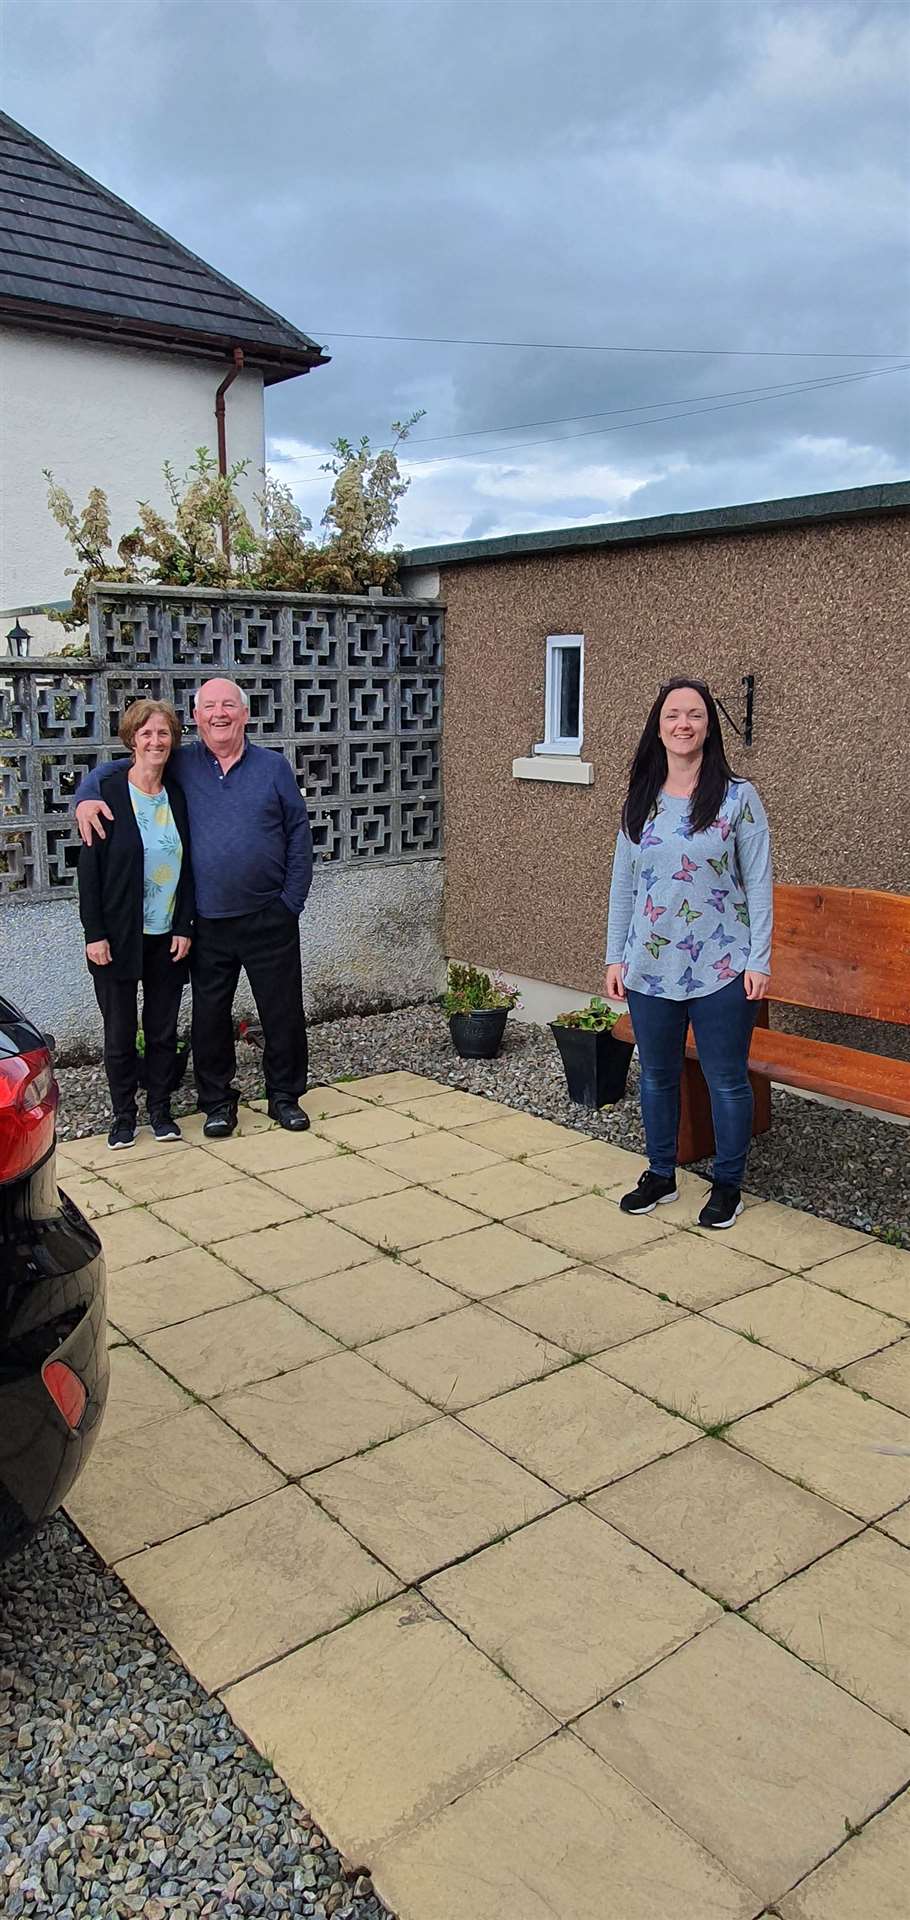 Claire Ironside is reunited with her parents Helen and John Ironside in the garden of their Kirkhill home in Inverness.